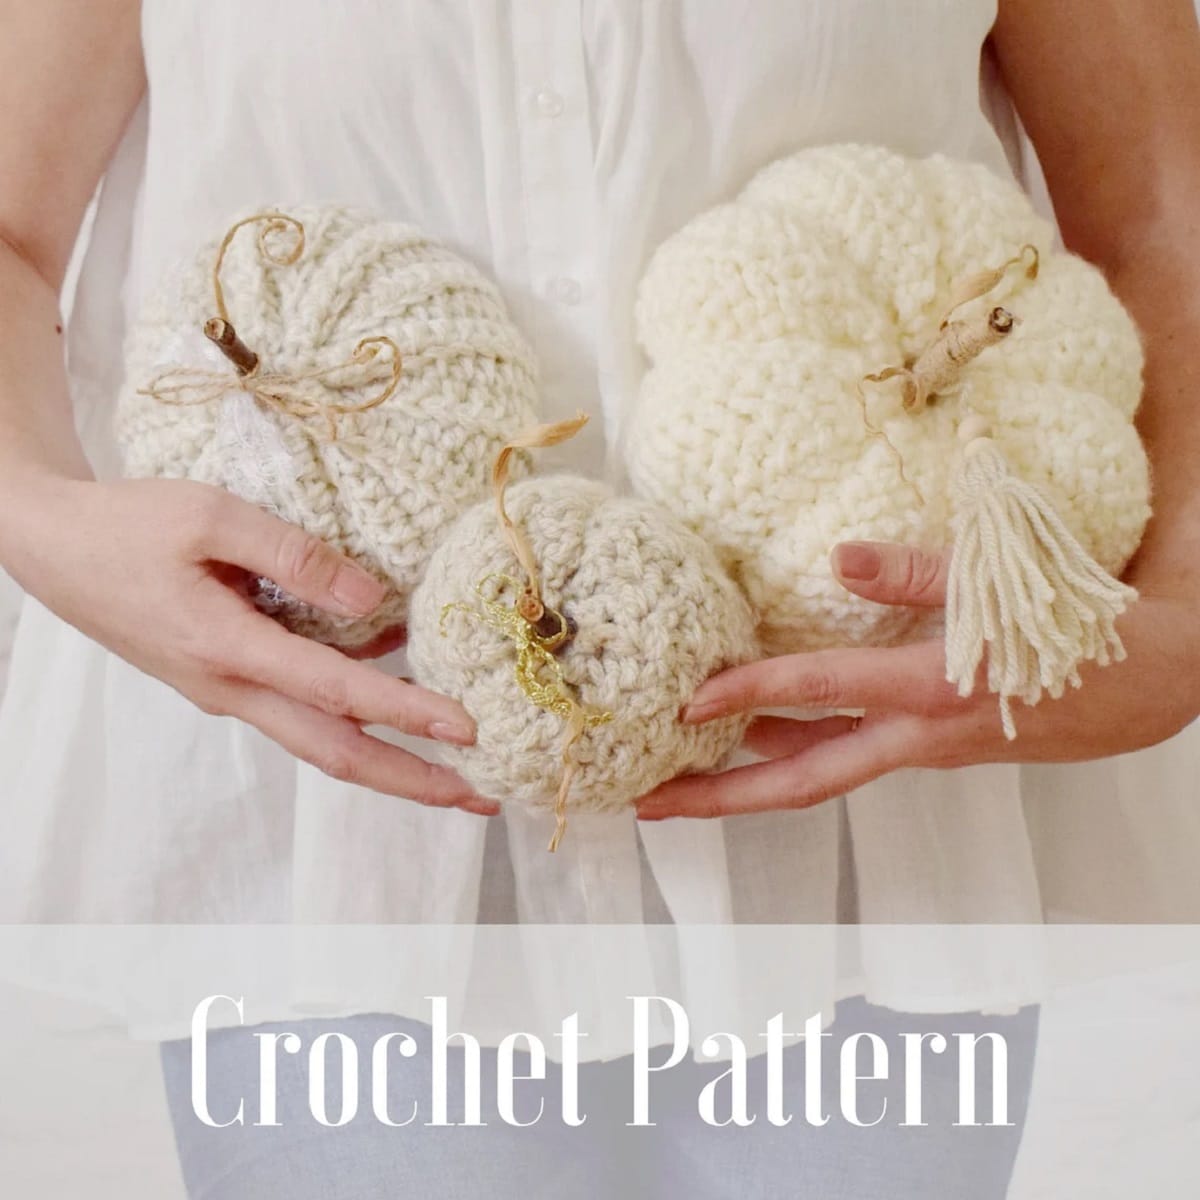 A woman in white holding three white crochet pumpkins in her arms.